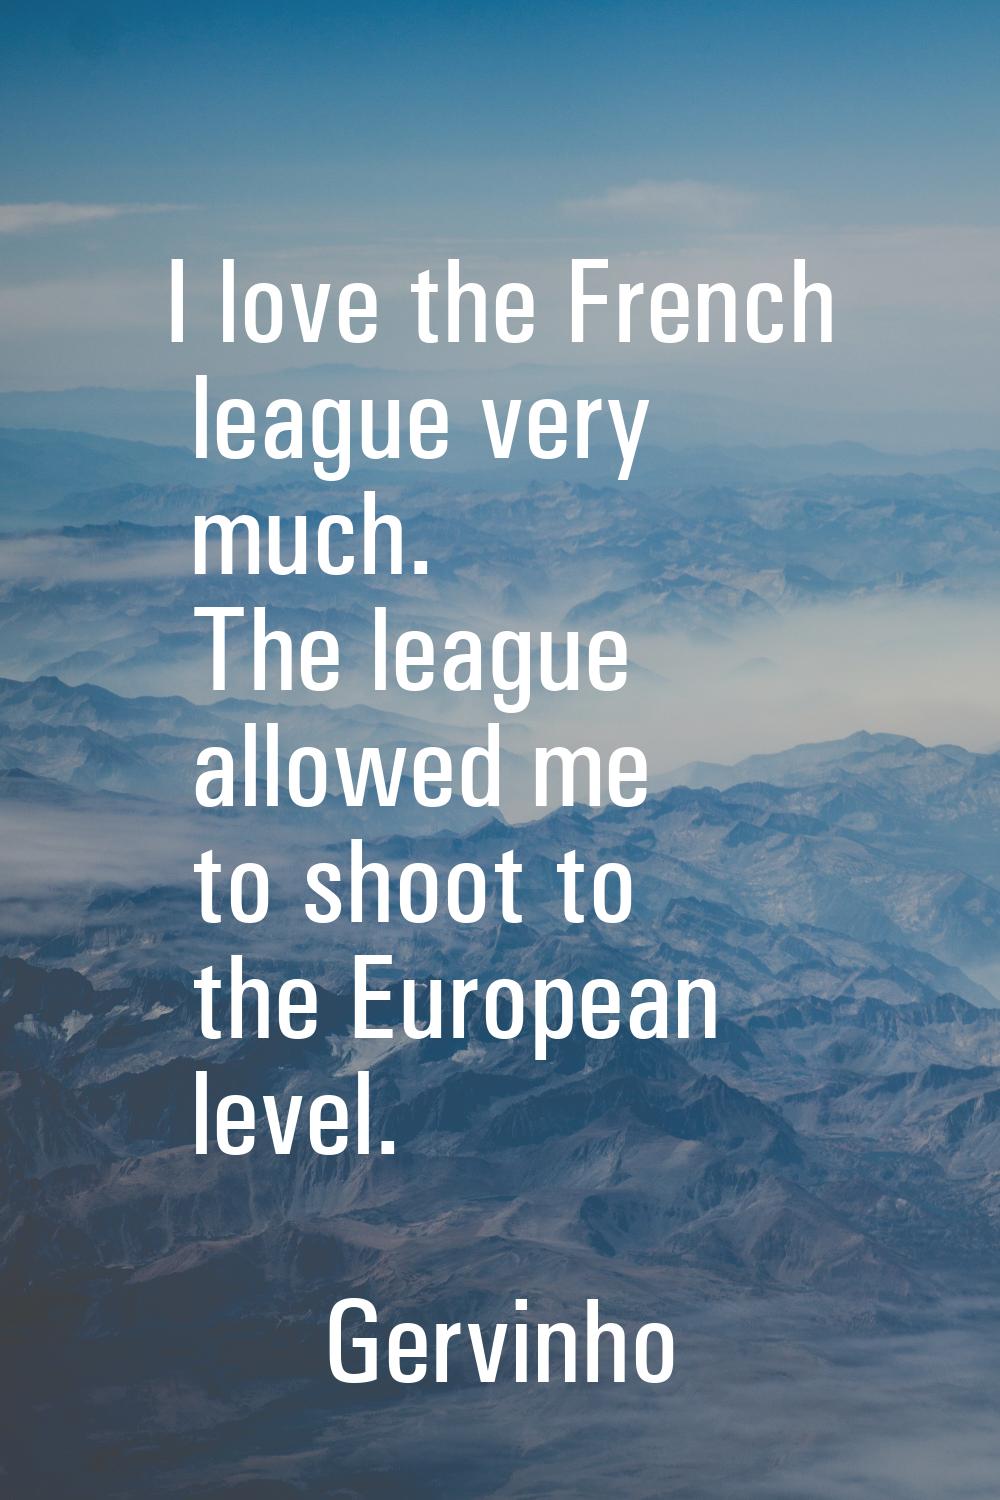 I love the French league very much. The league allowed me to shoot to the European level.